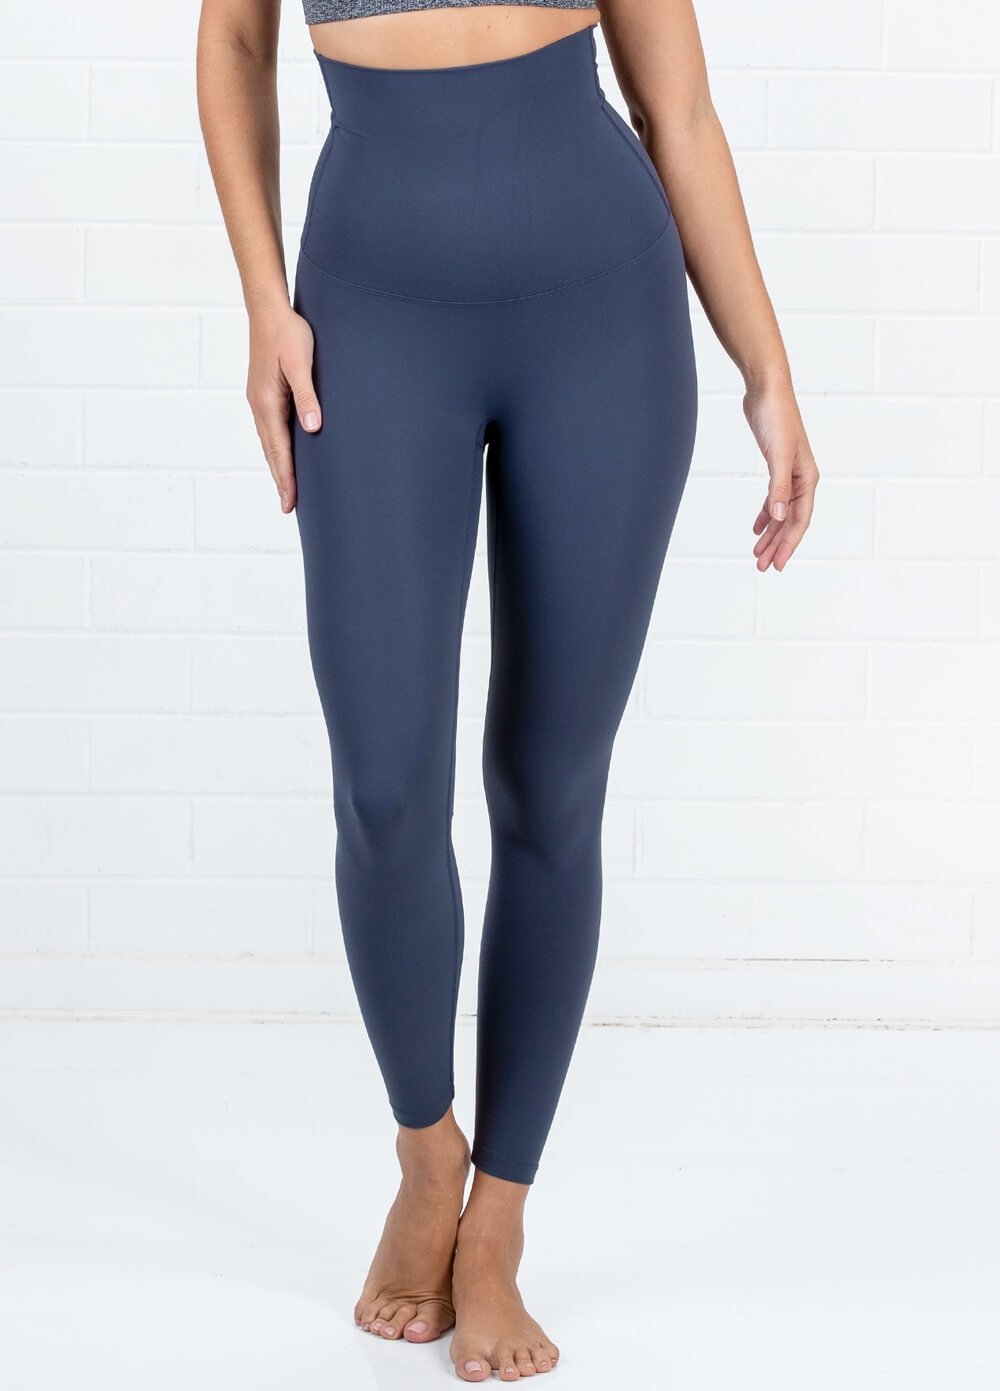 Queen Bee - Jenna High Waist Active Shaping Tights in Aegean Blue